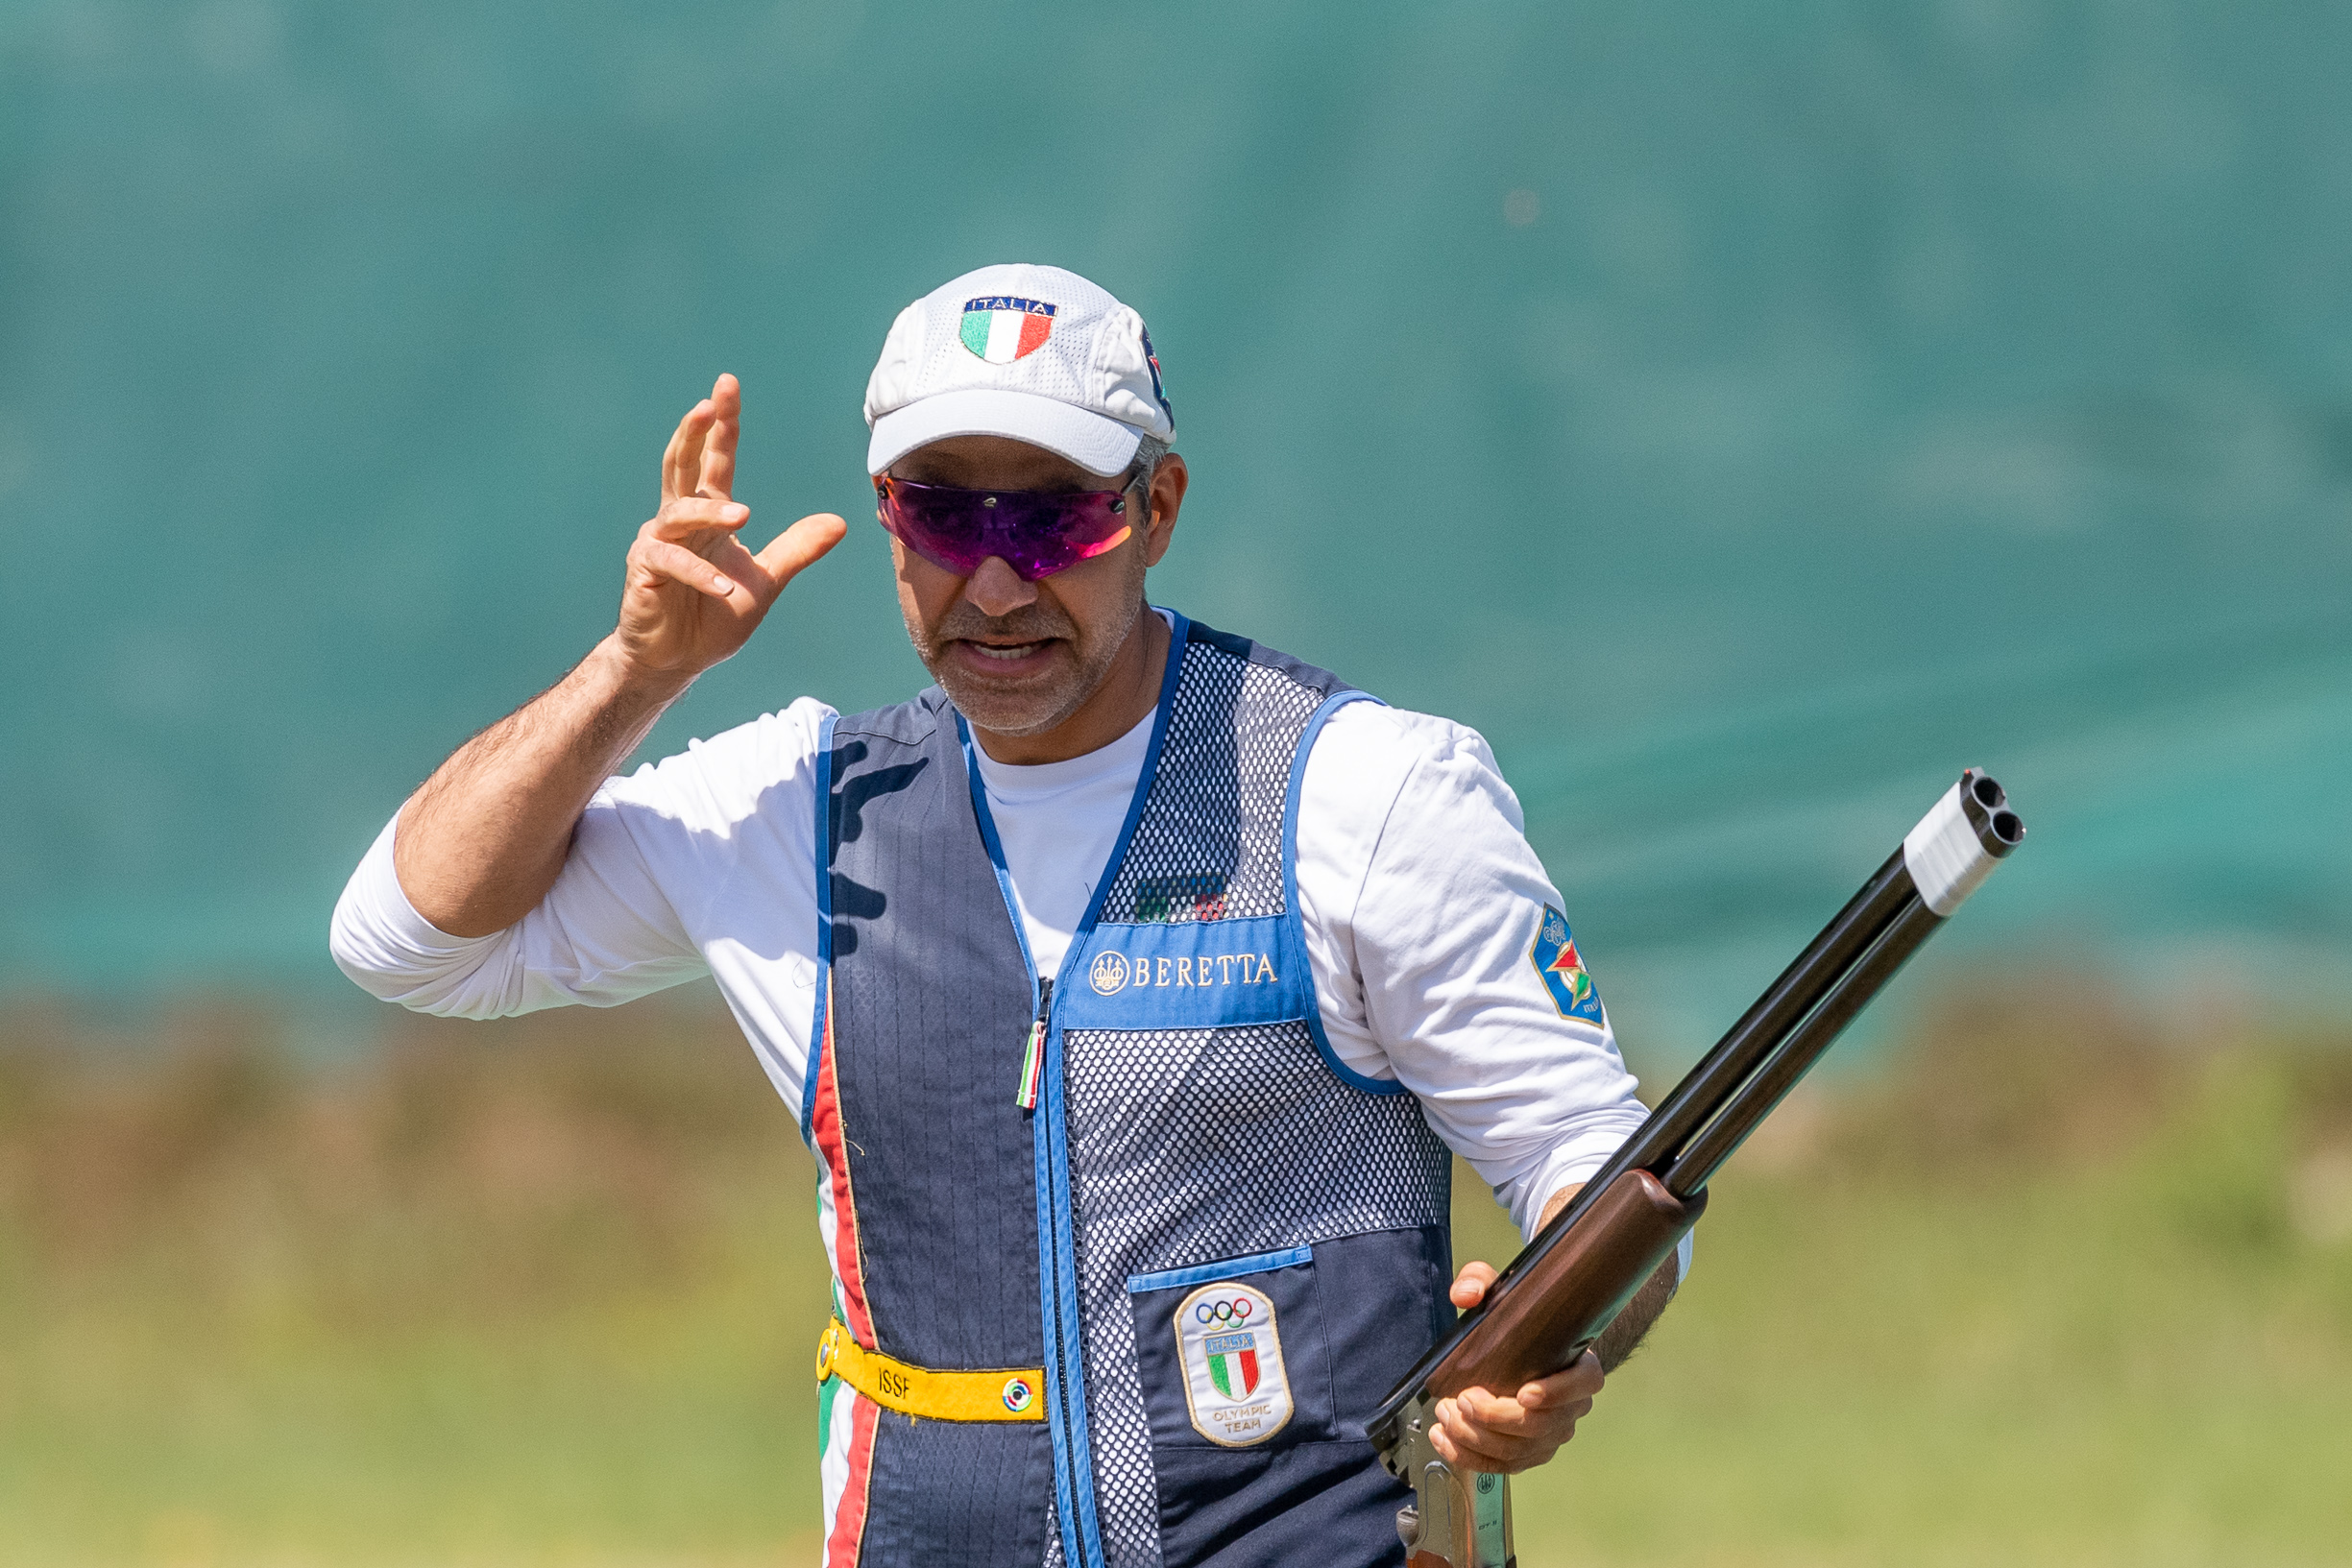 SHOTGUN. DELUGE OF MEDALS AT THE ISSF WORLD CUP IN LONATO